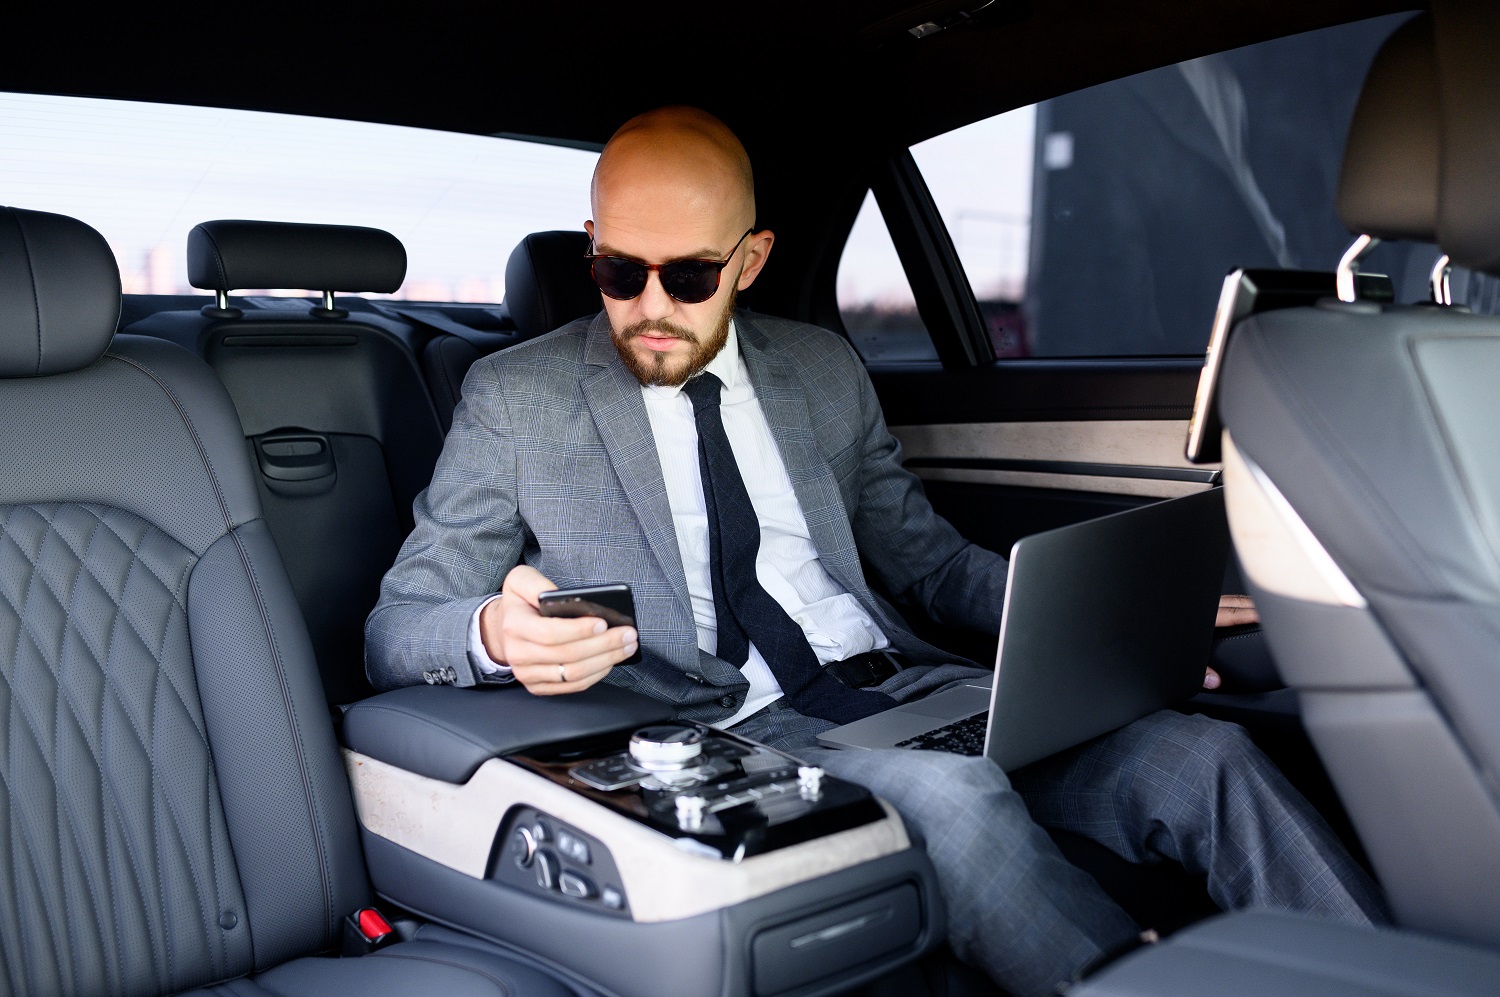 Chauffeur Driven Cars on Rent Service Car Hire with Driver